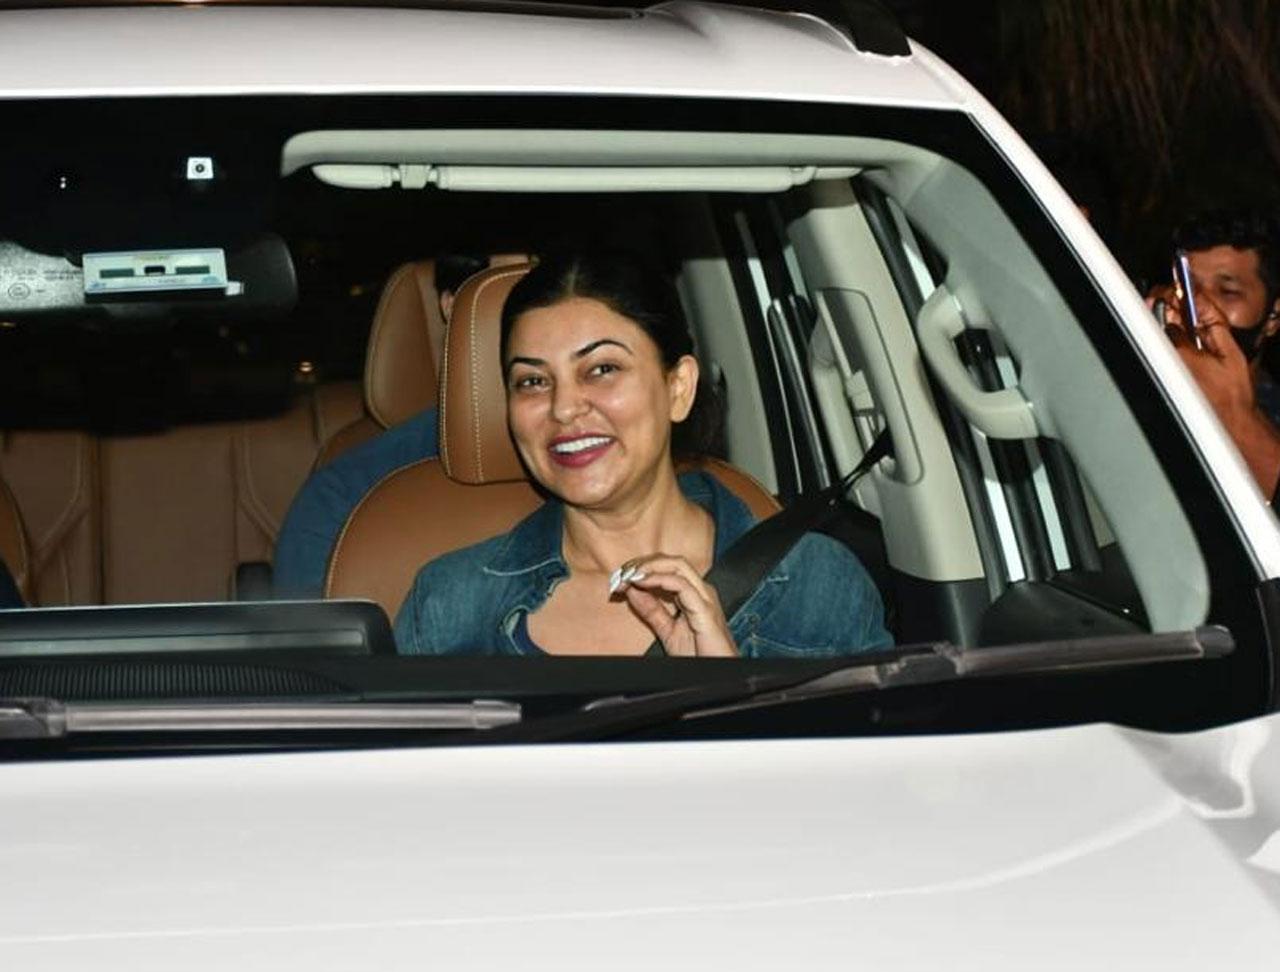 Is it possible to remain friends with your ex-partner? After looking at Sushmita Sen and her former boyfriend Rohman Shawl's bond, it seems like staying on cordial terms with your ex is not a tough task. On Monday night, Sushmita and her younger daughter Alisah stepped out for a dinner with Rohman in Mumbai.